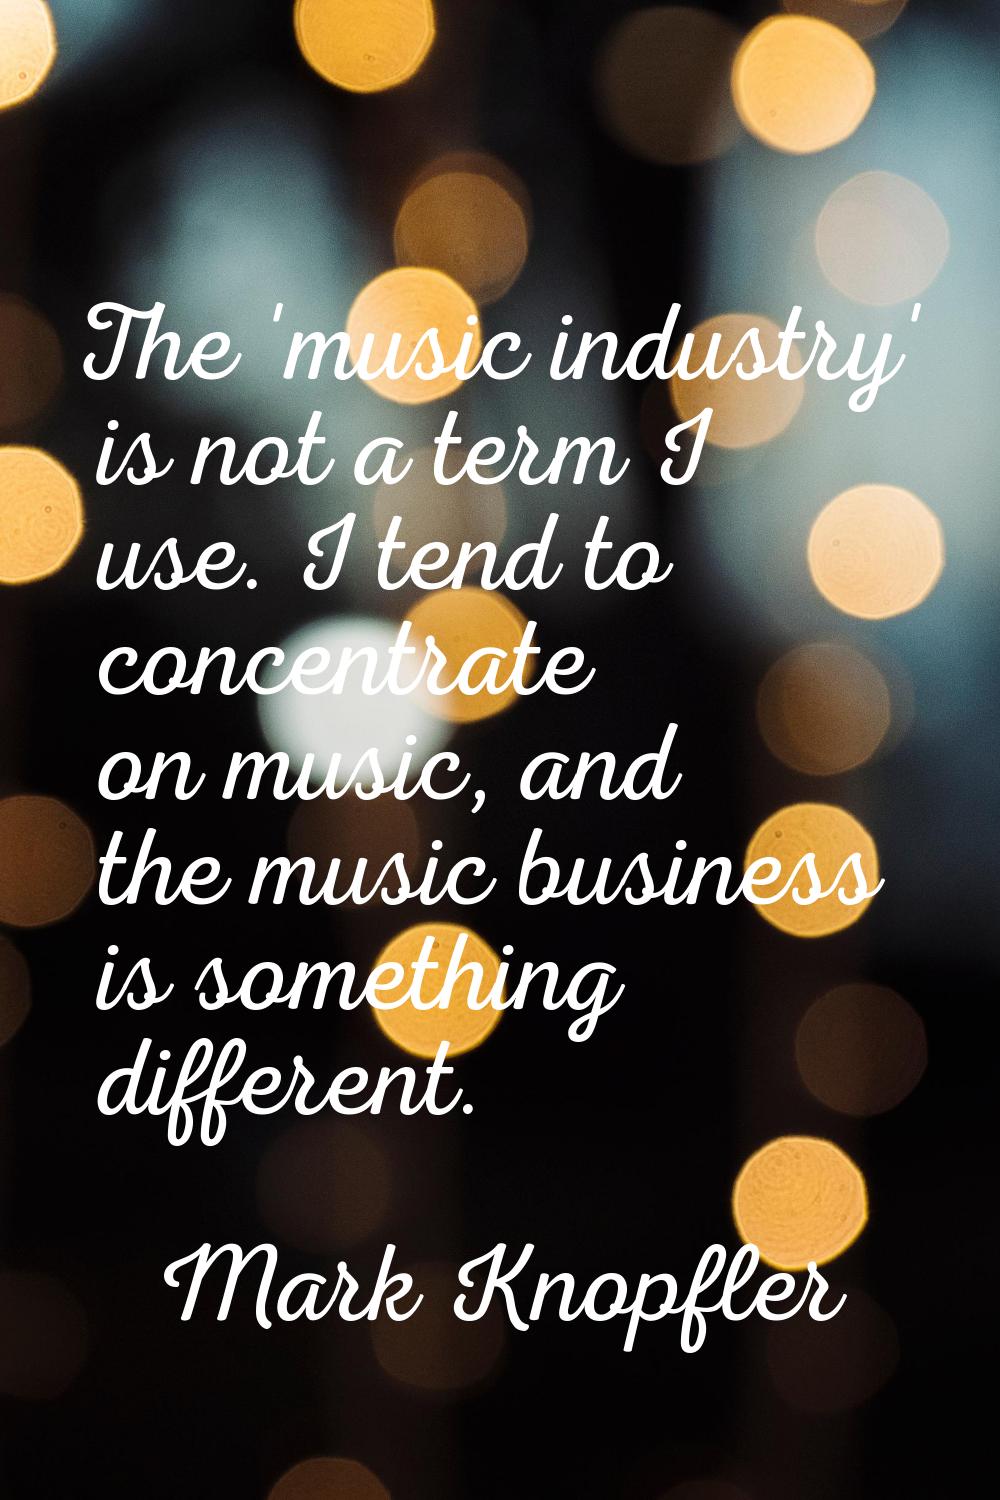 The 'music industry' is not a term I use. I tend to concentrate on music, and the music business is